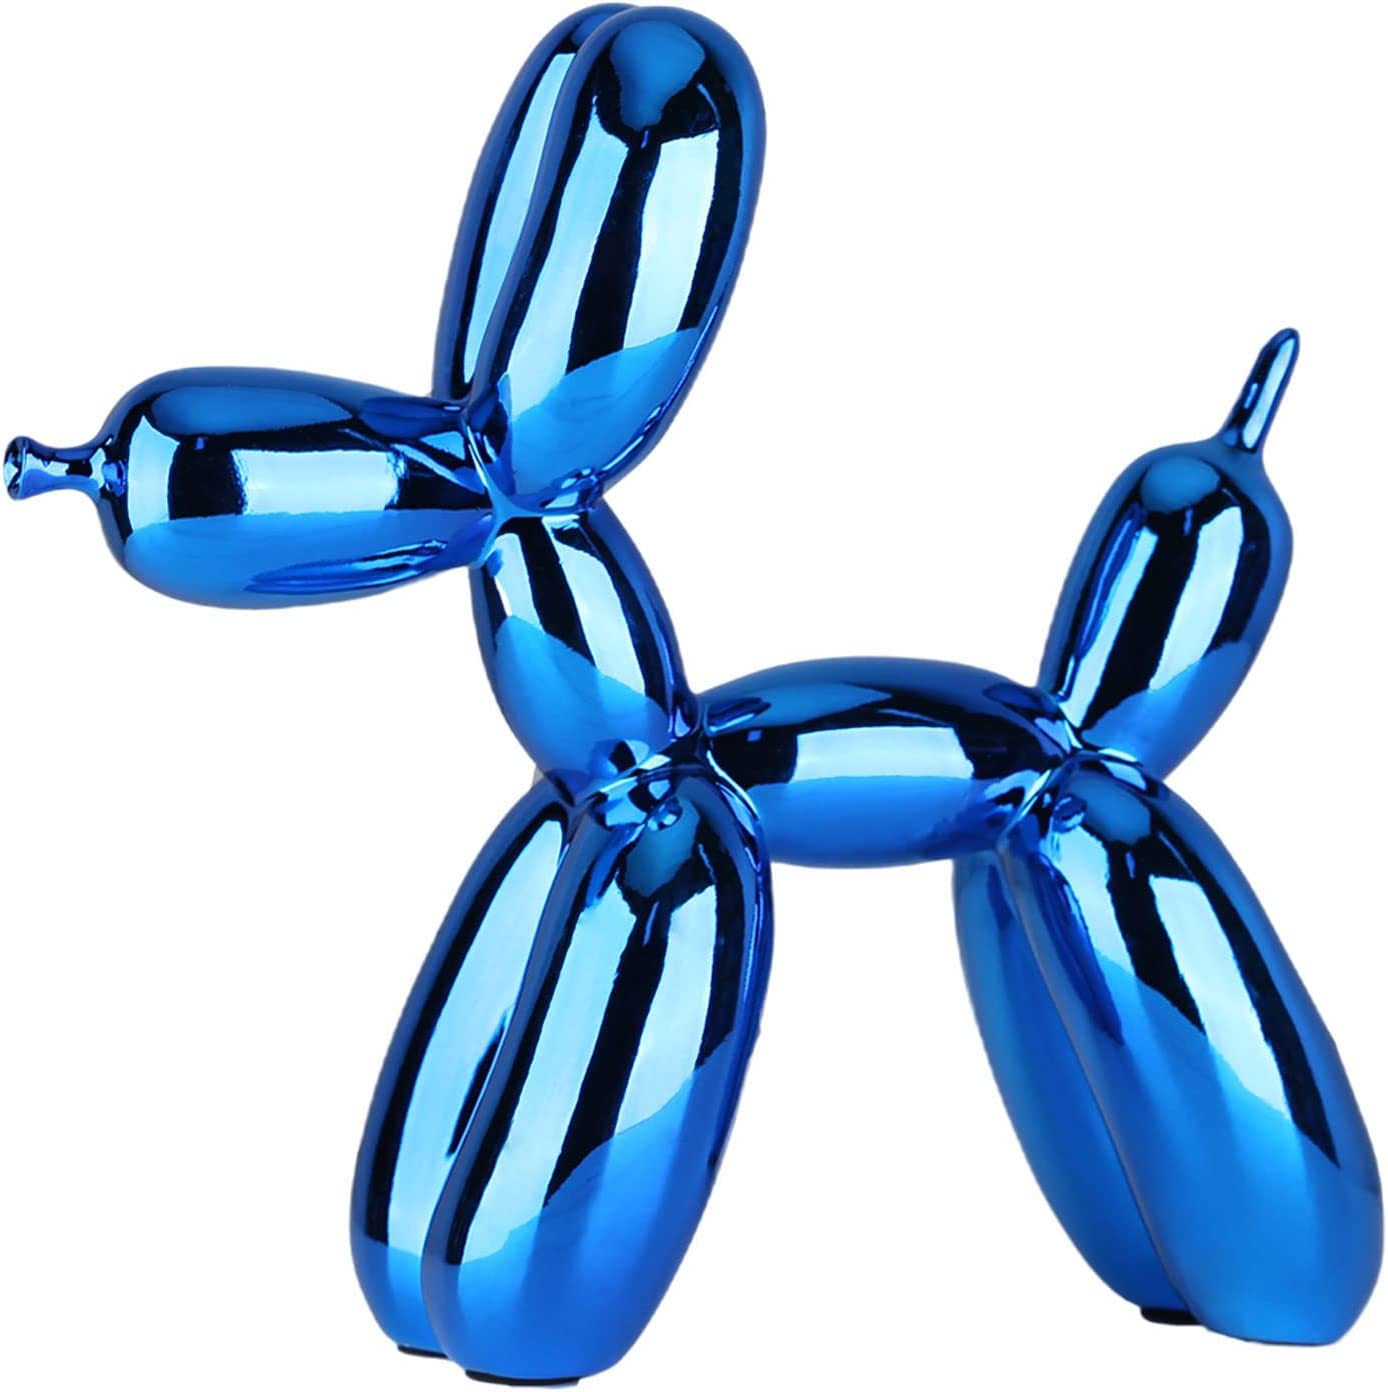 Collectible Electroplated Balloon Dog Art Sculpture Desktop Statue - Home Decor Gifts and More